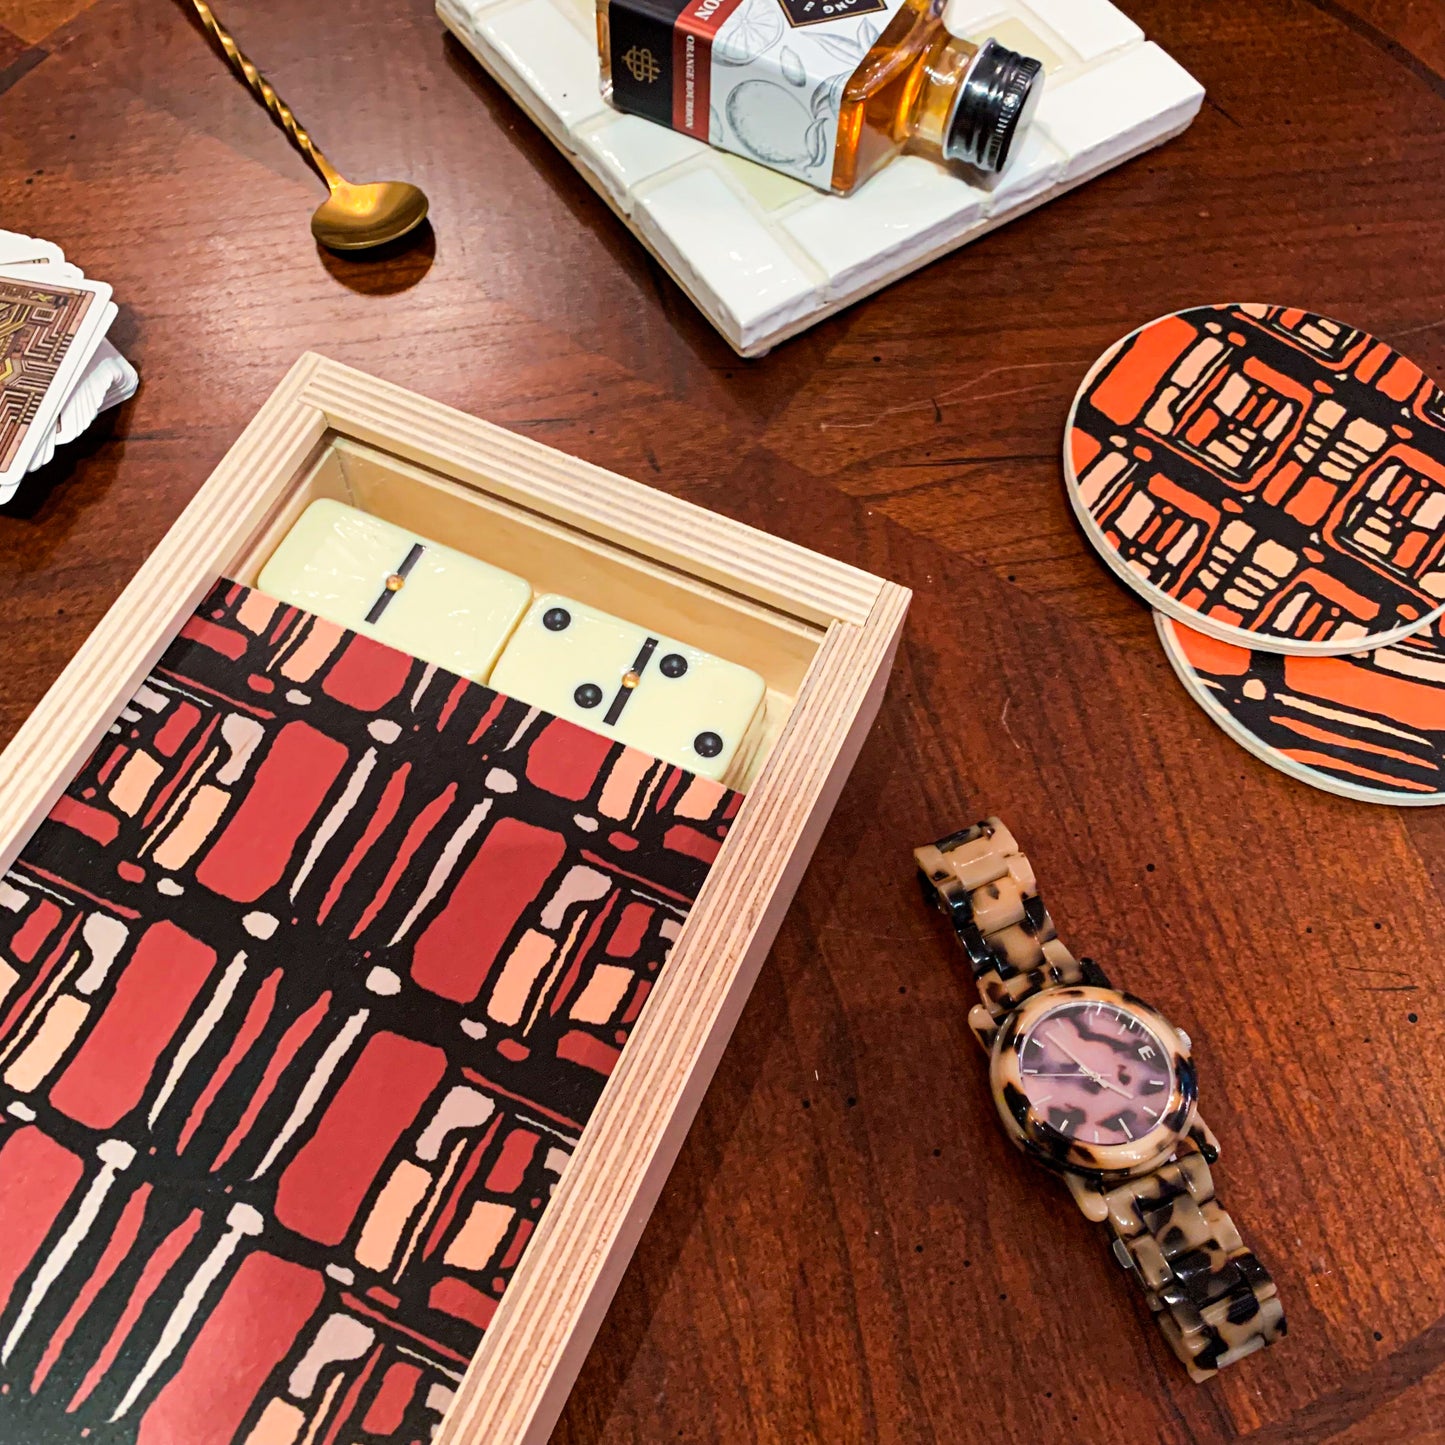 luxury domino set in rue maroon with matching pair of circular coasters, a blonde tortoise watch, a golden bar spoon add to the background of the photo set up, but the Domino is the focal point